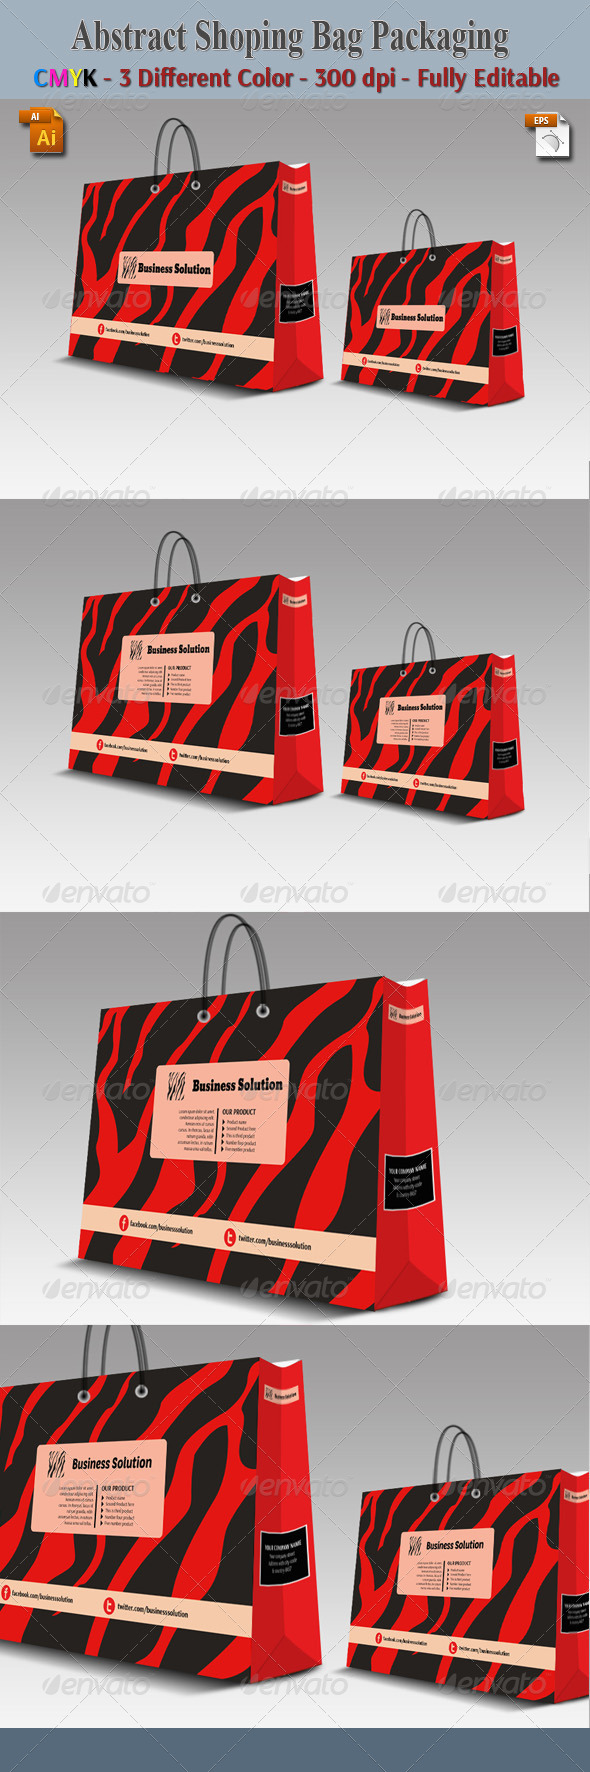 Abstract Shoping Bag Packaging